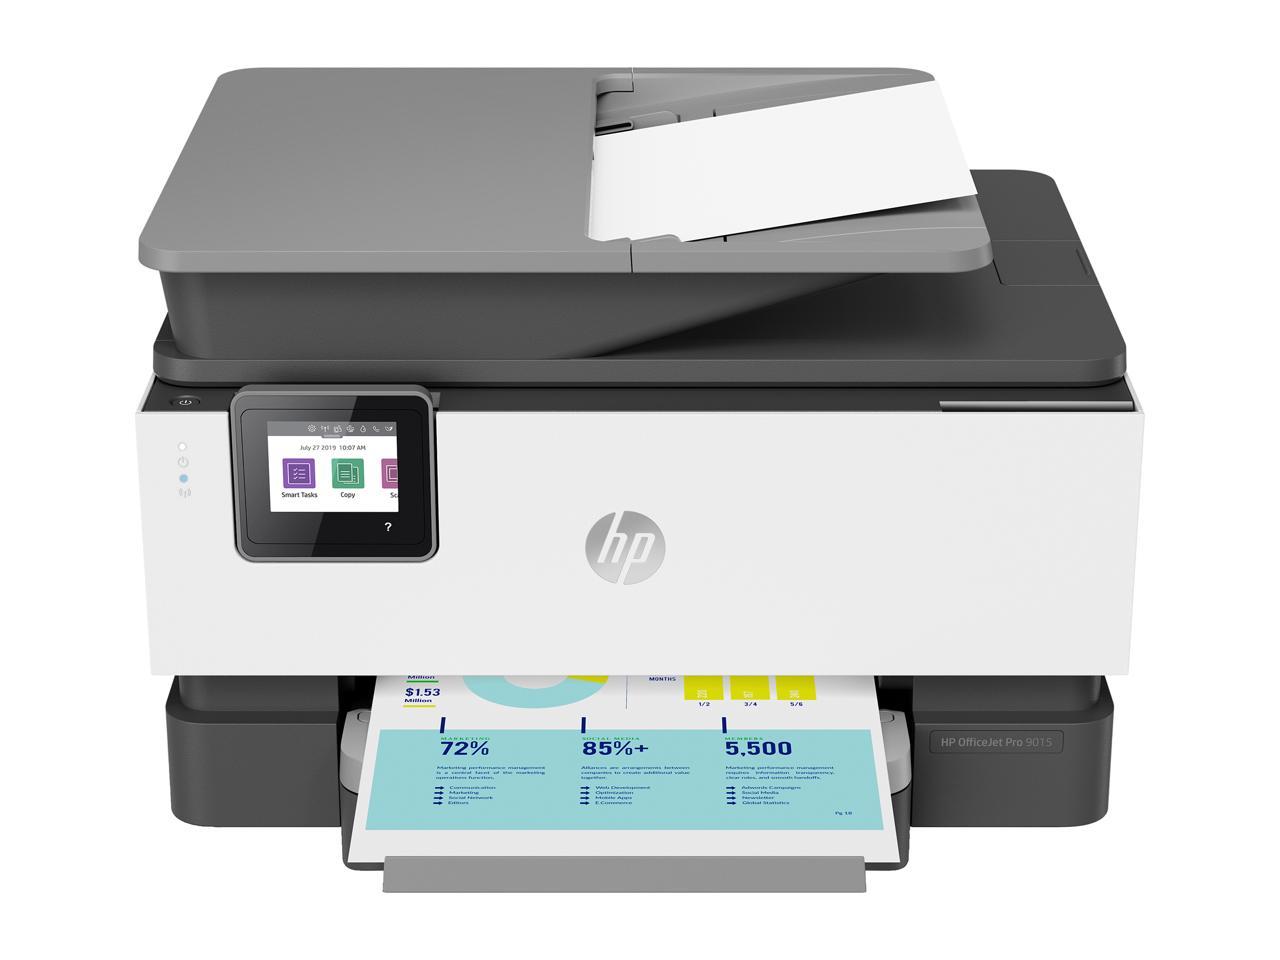 Hp officejet pro 9015 scan to pdf download